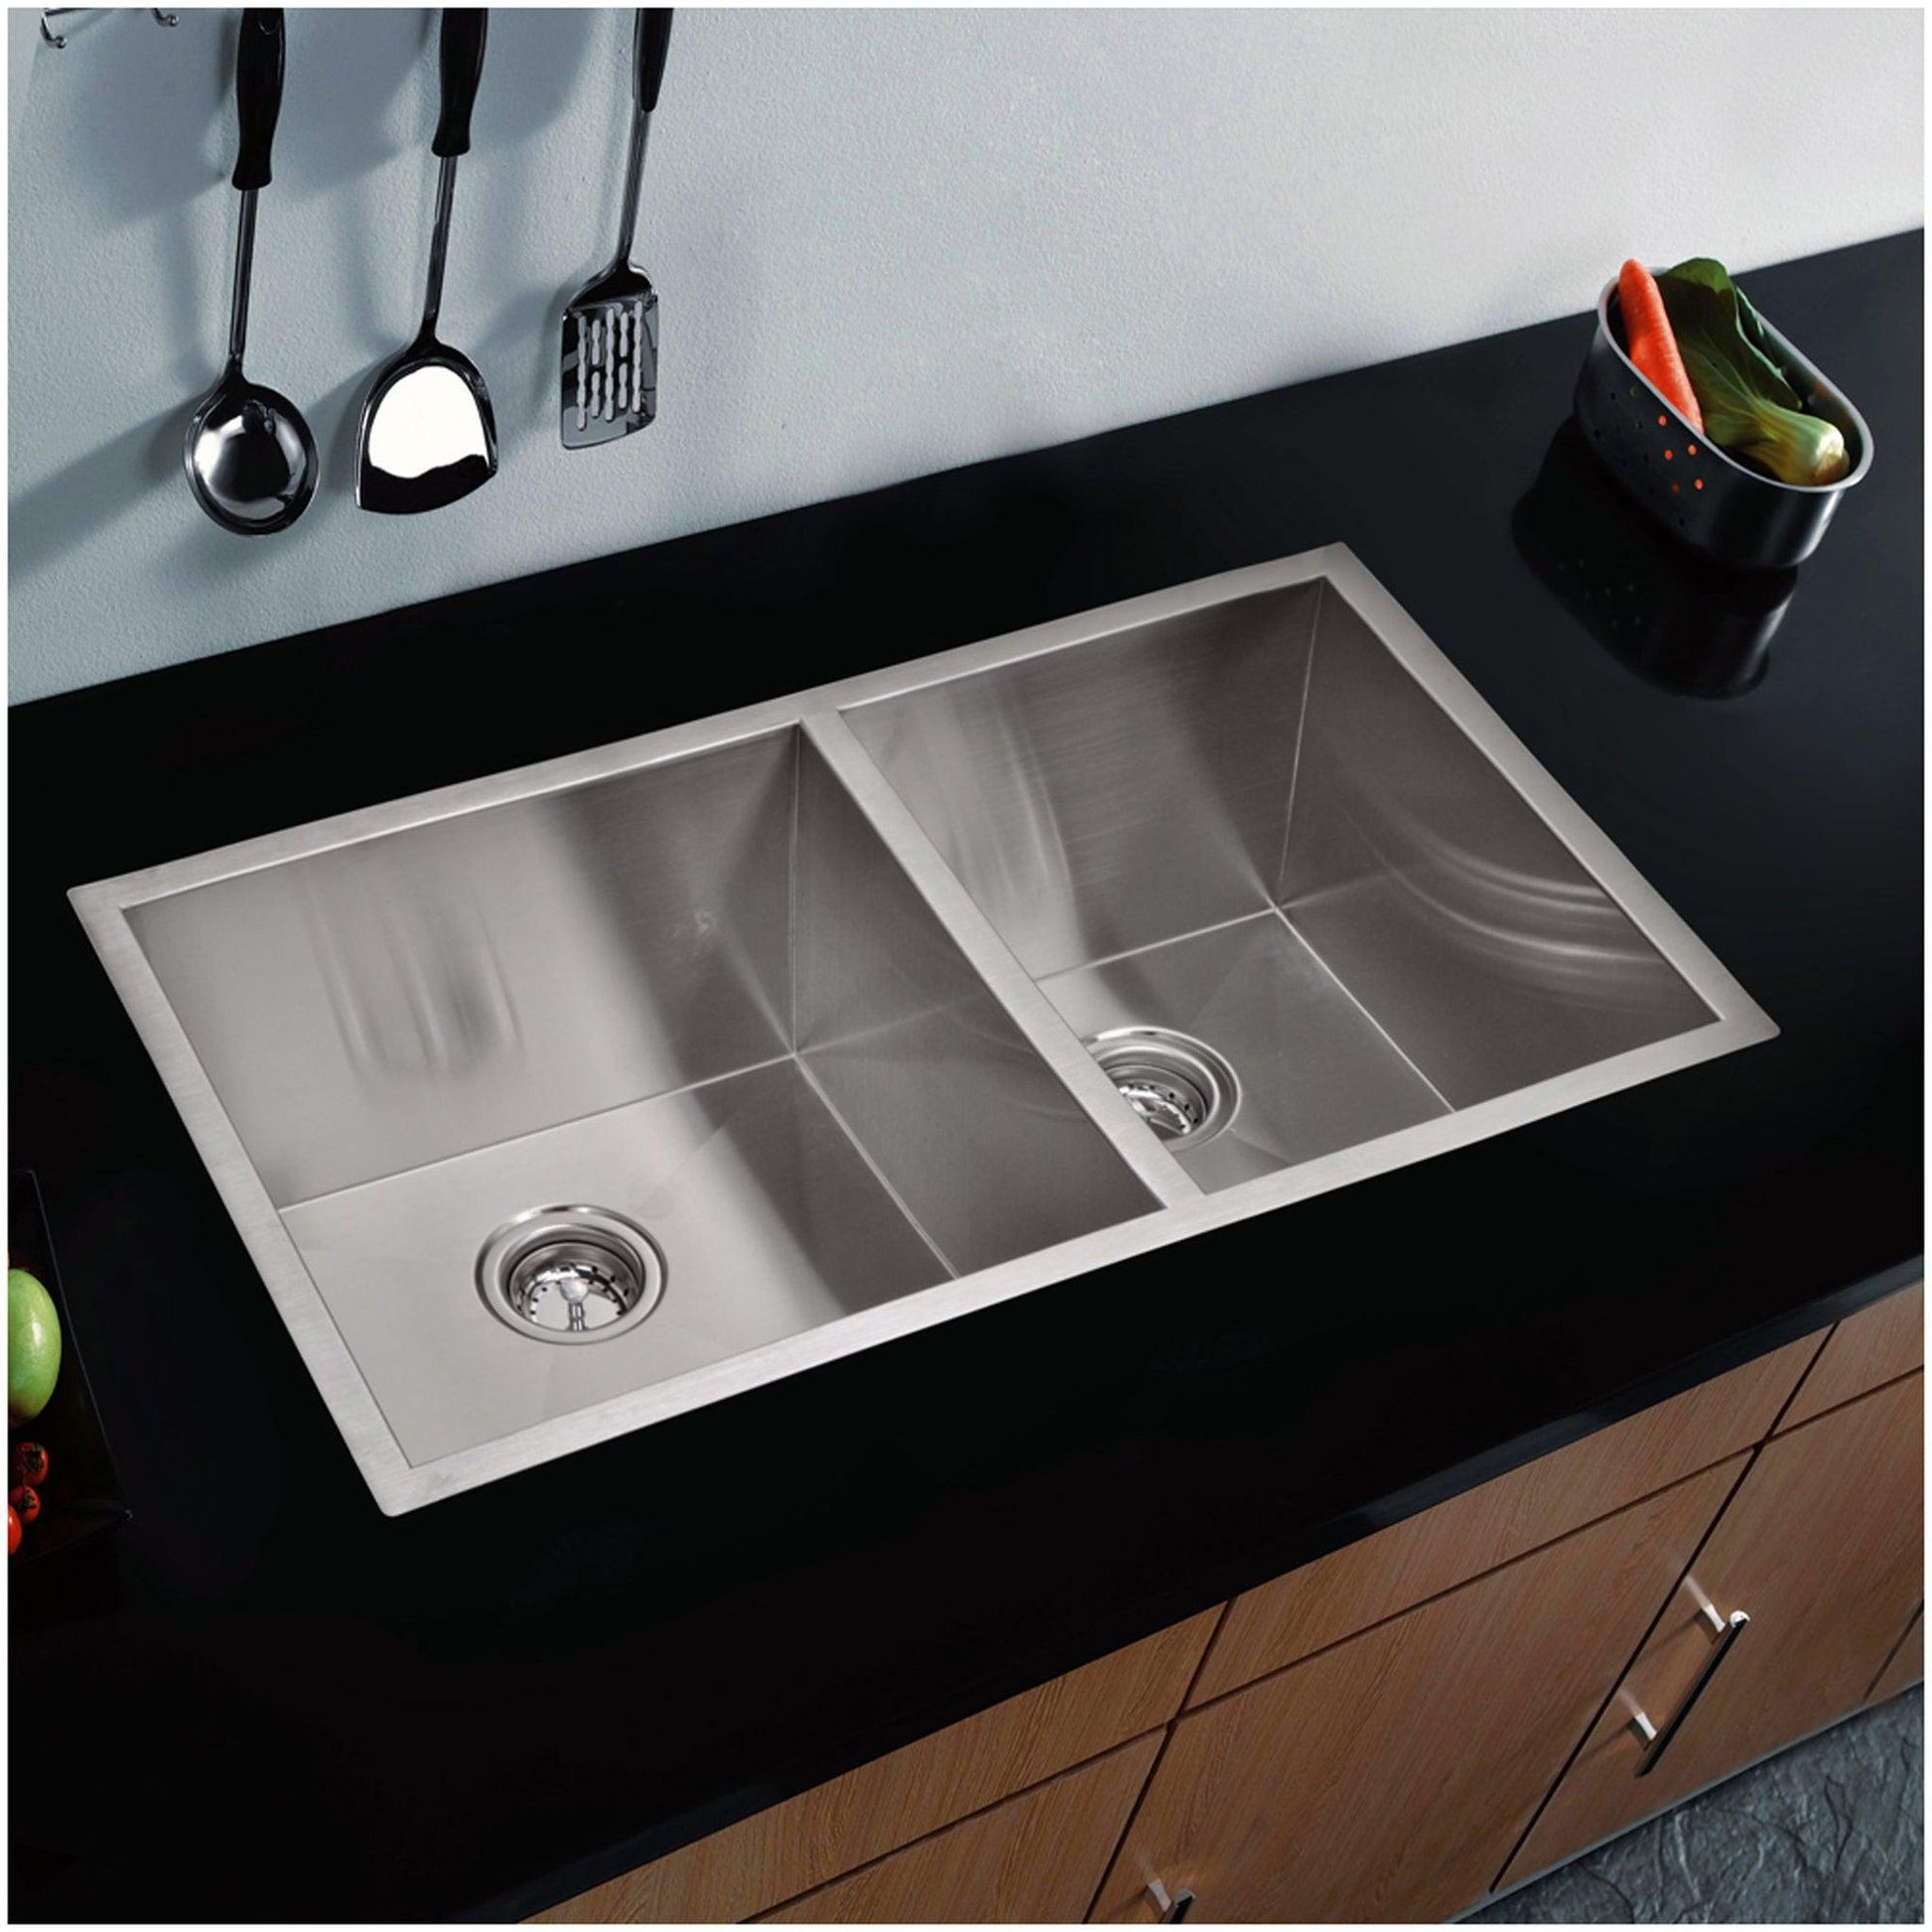 Water Creation Zero Radius 60/40 Double Bowl Stainless Steel Hand Made Undermount 33 Inch X 20 Inch Sink With Drains, Strainers, And Bottom Grids